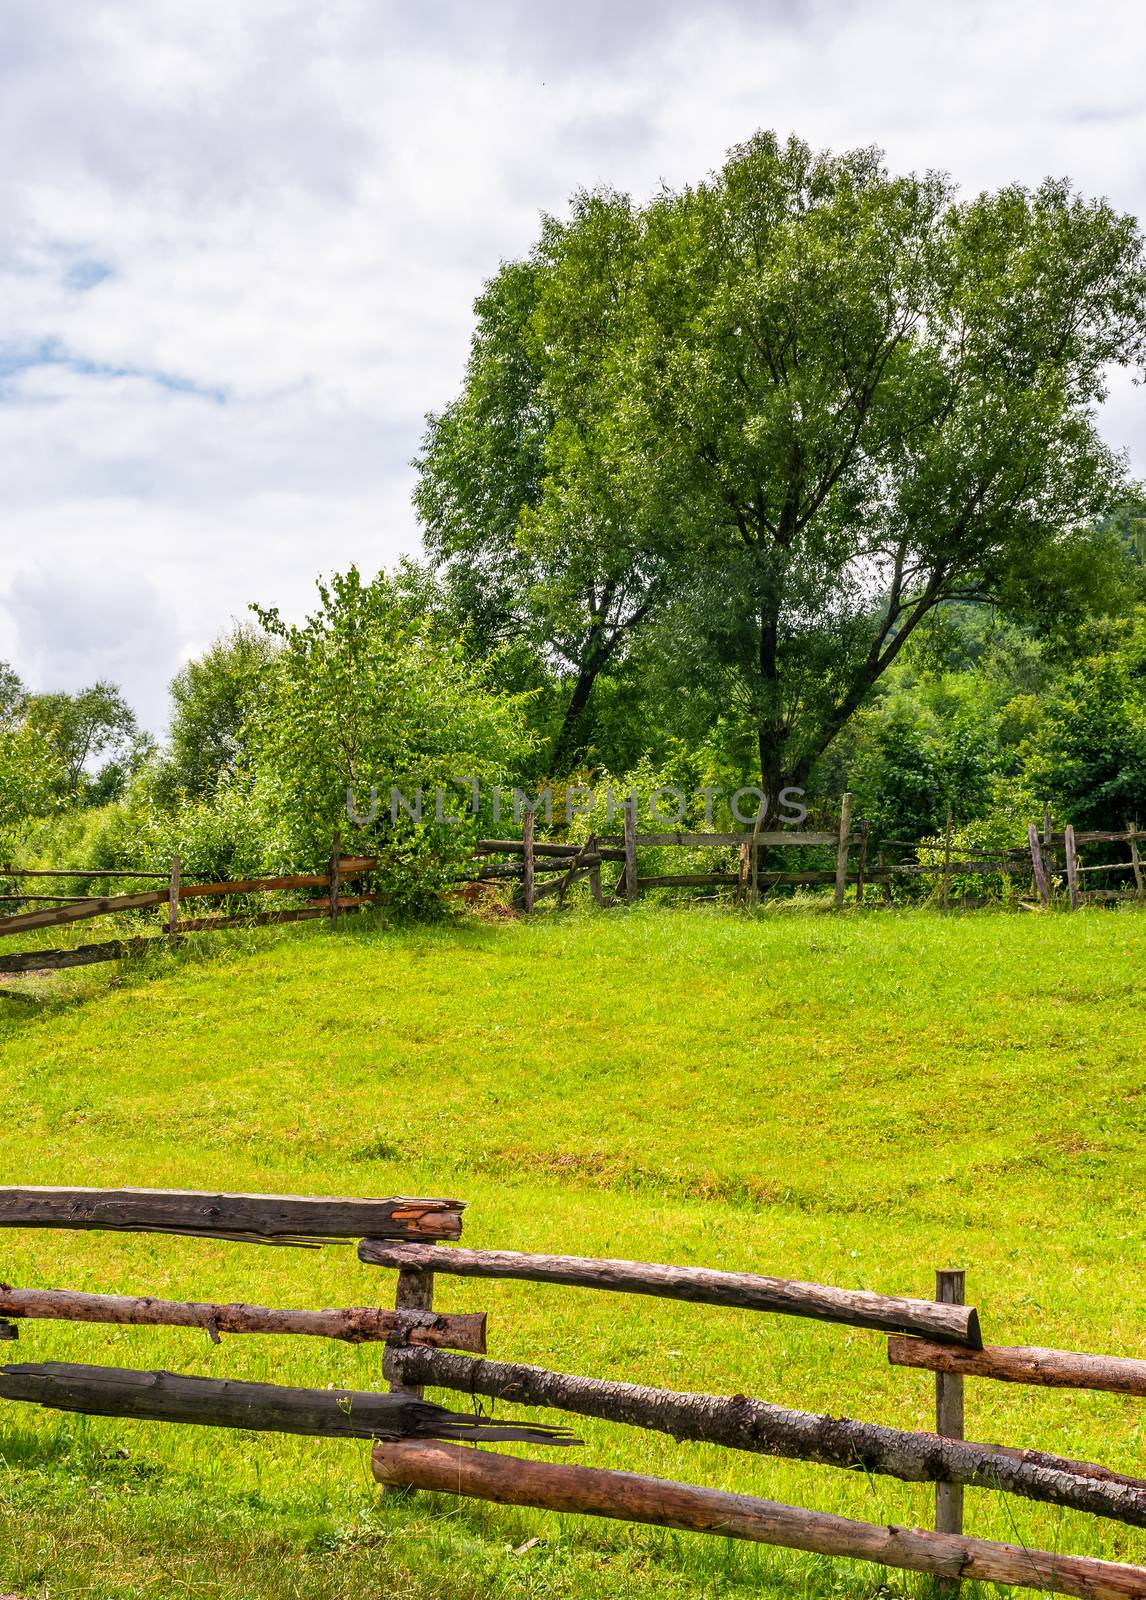 wooden fence on grassy rural field with tree by Pellinni